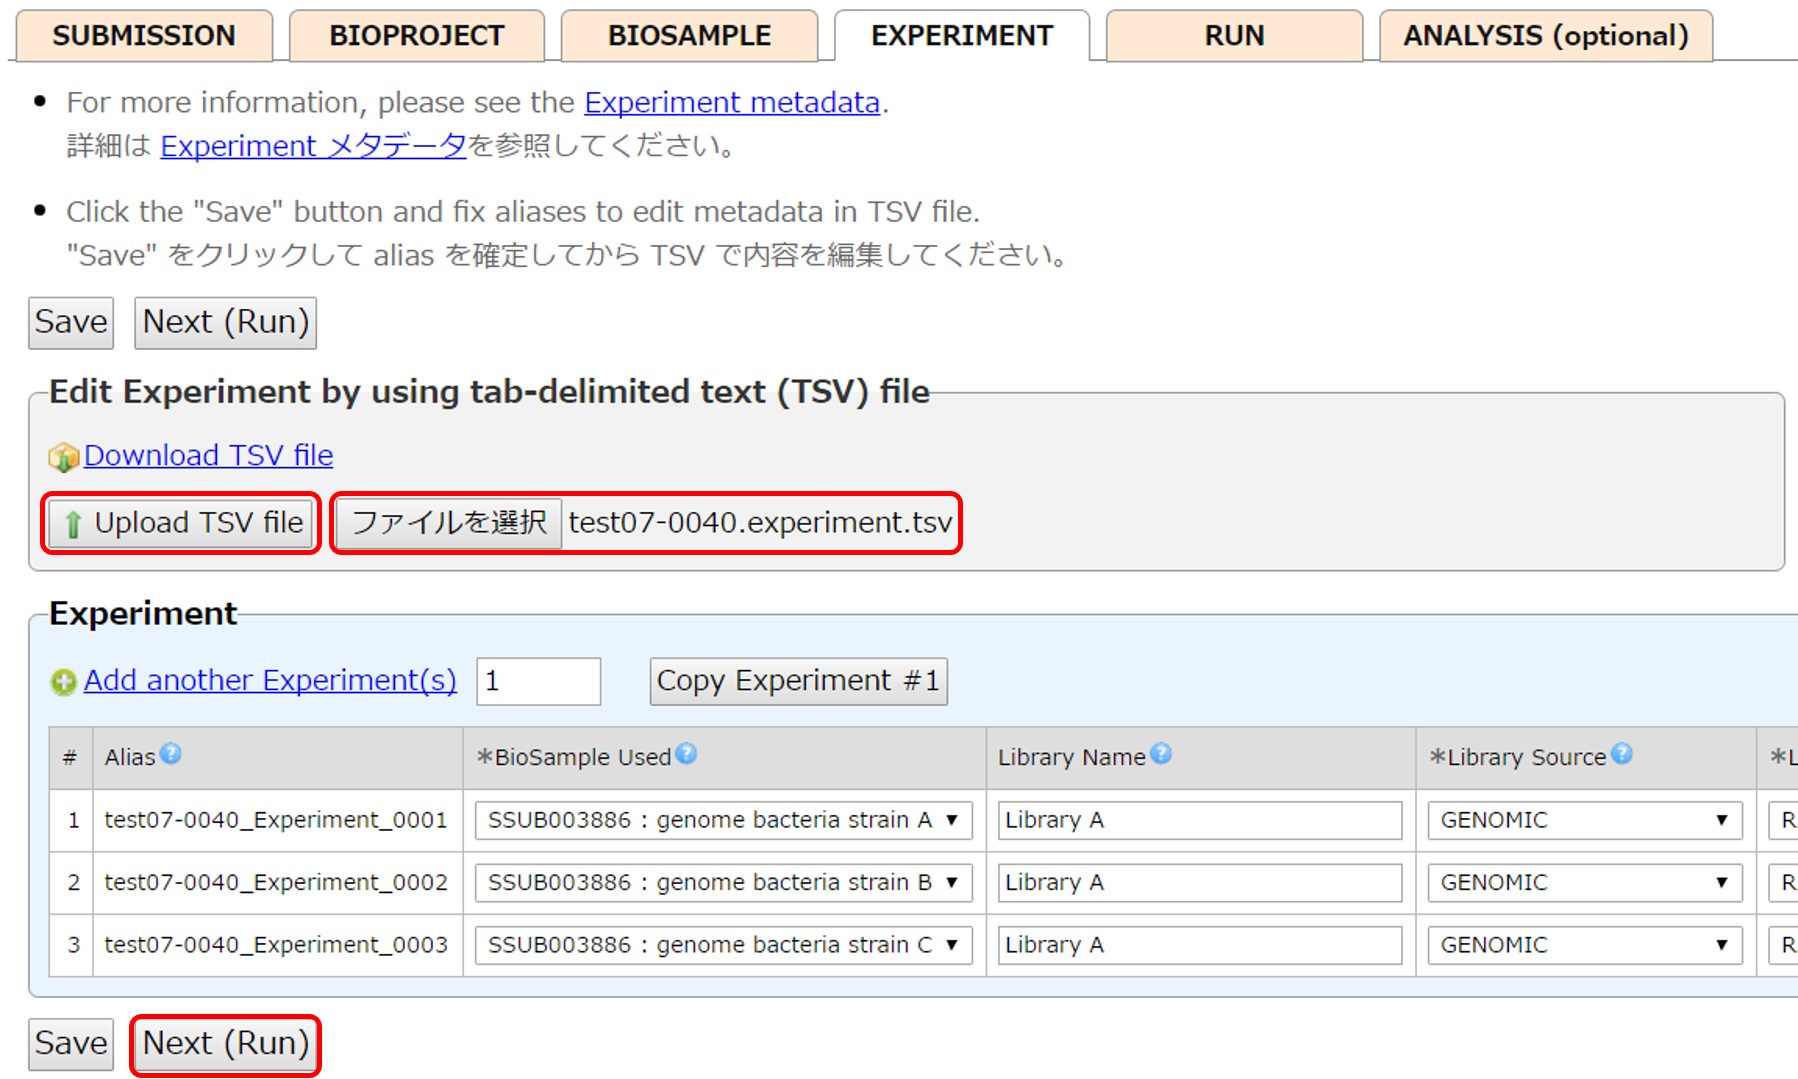 Upload Experiment in a tab-delimited text file